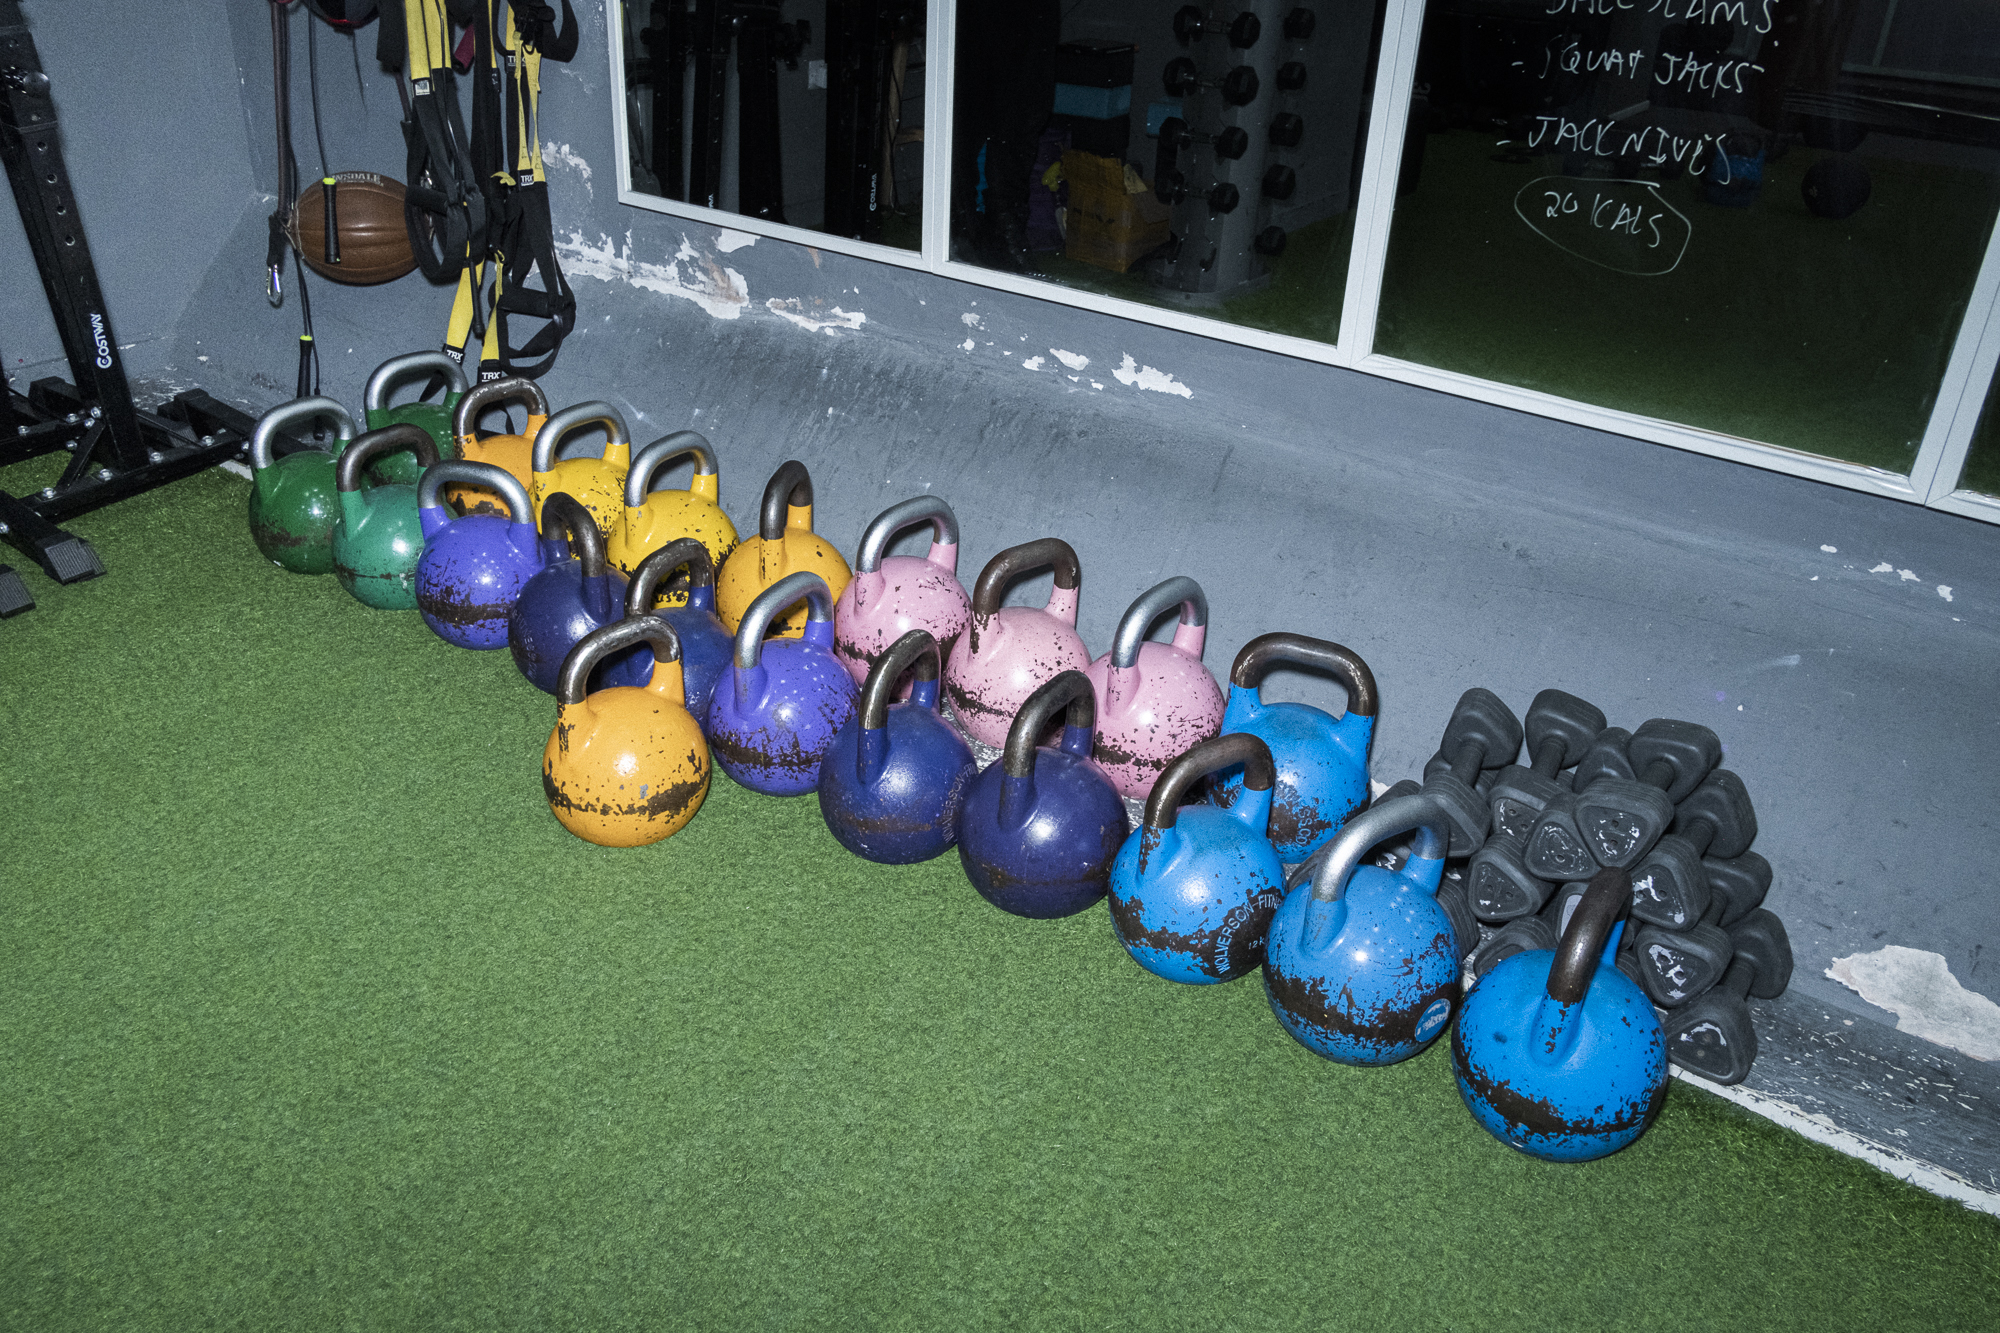 A row of dumbbells at the gym